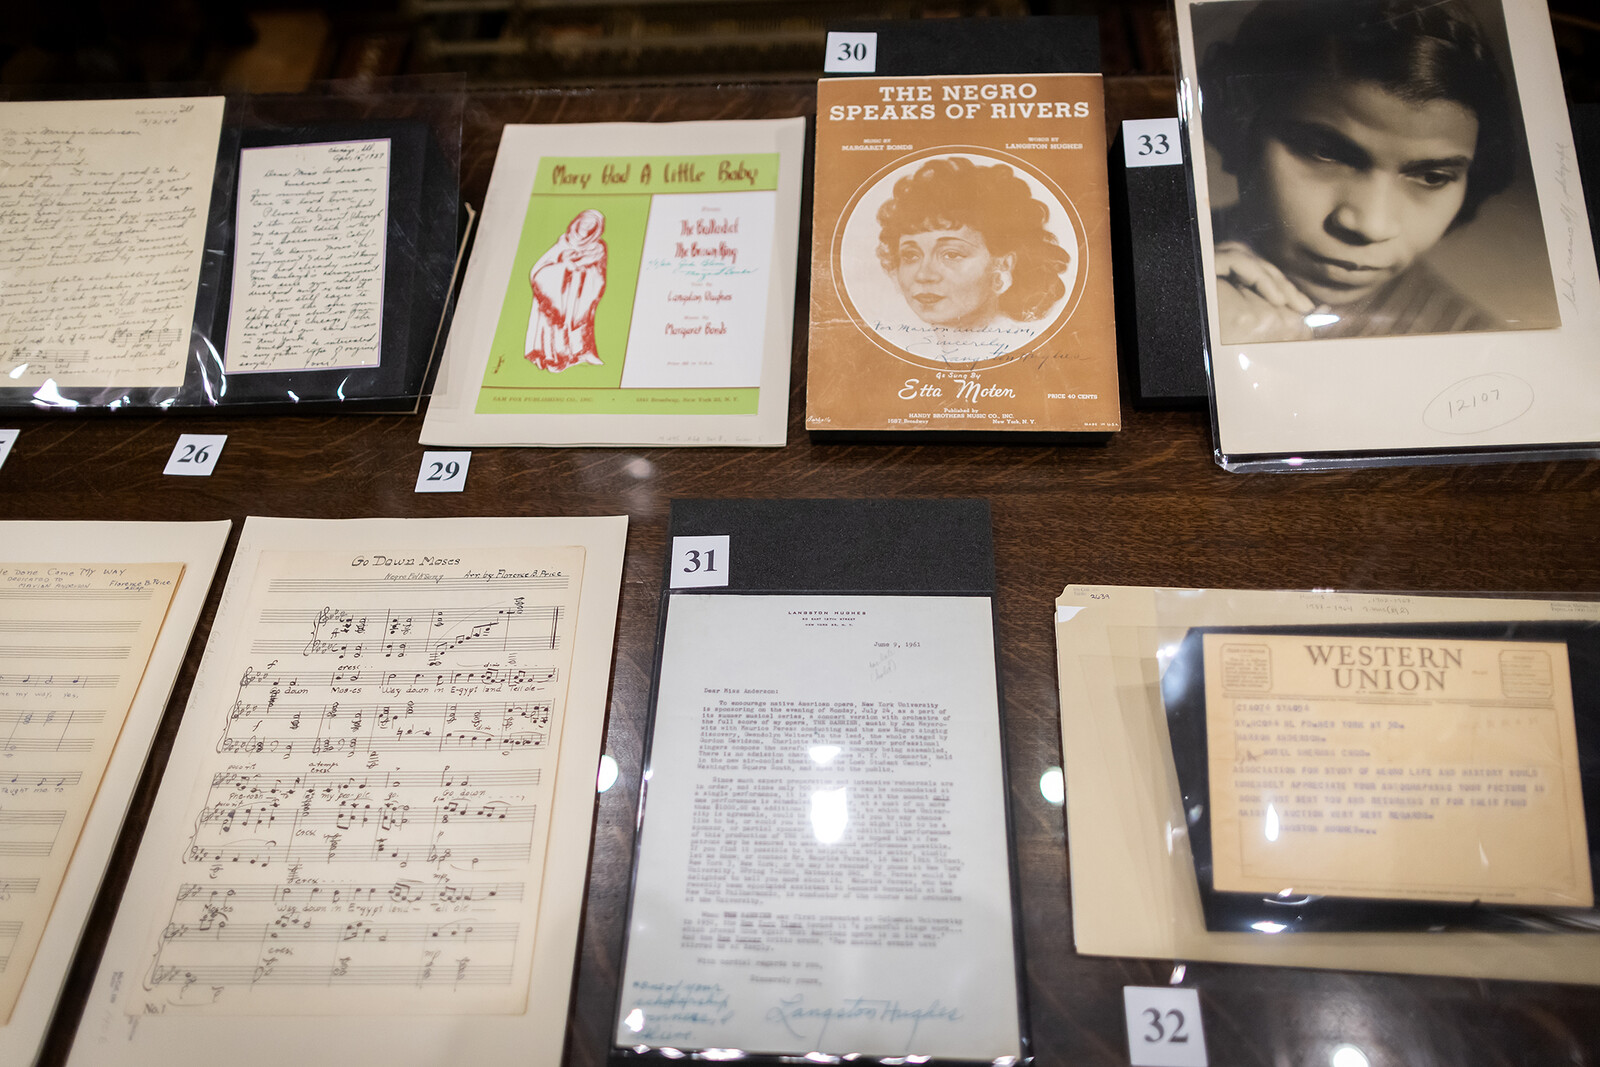 marian anderson collection at kislak center